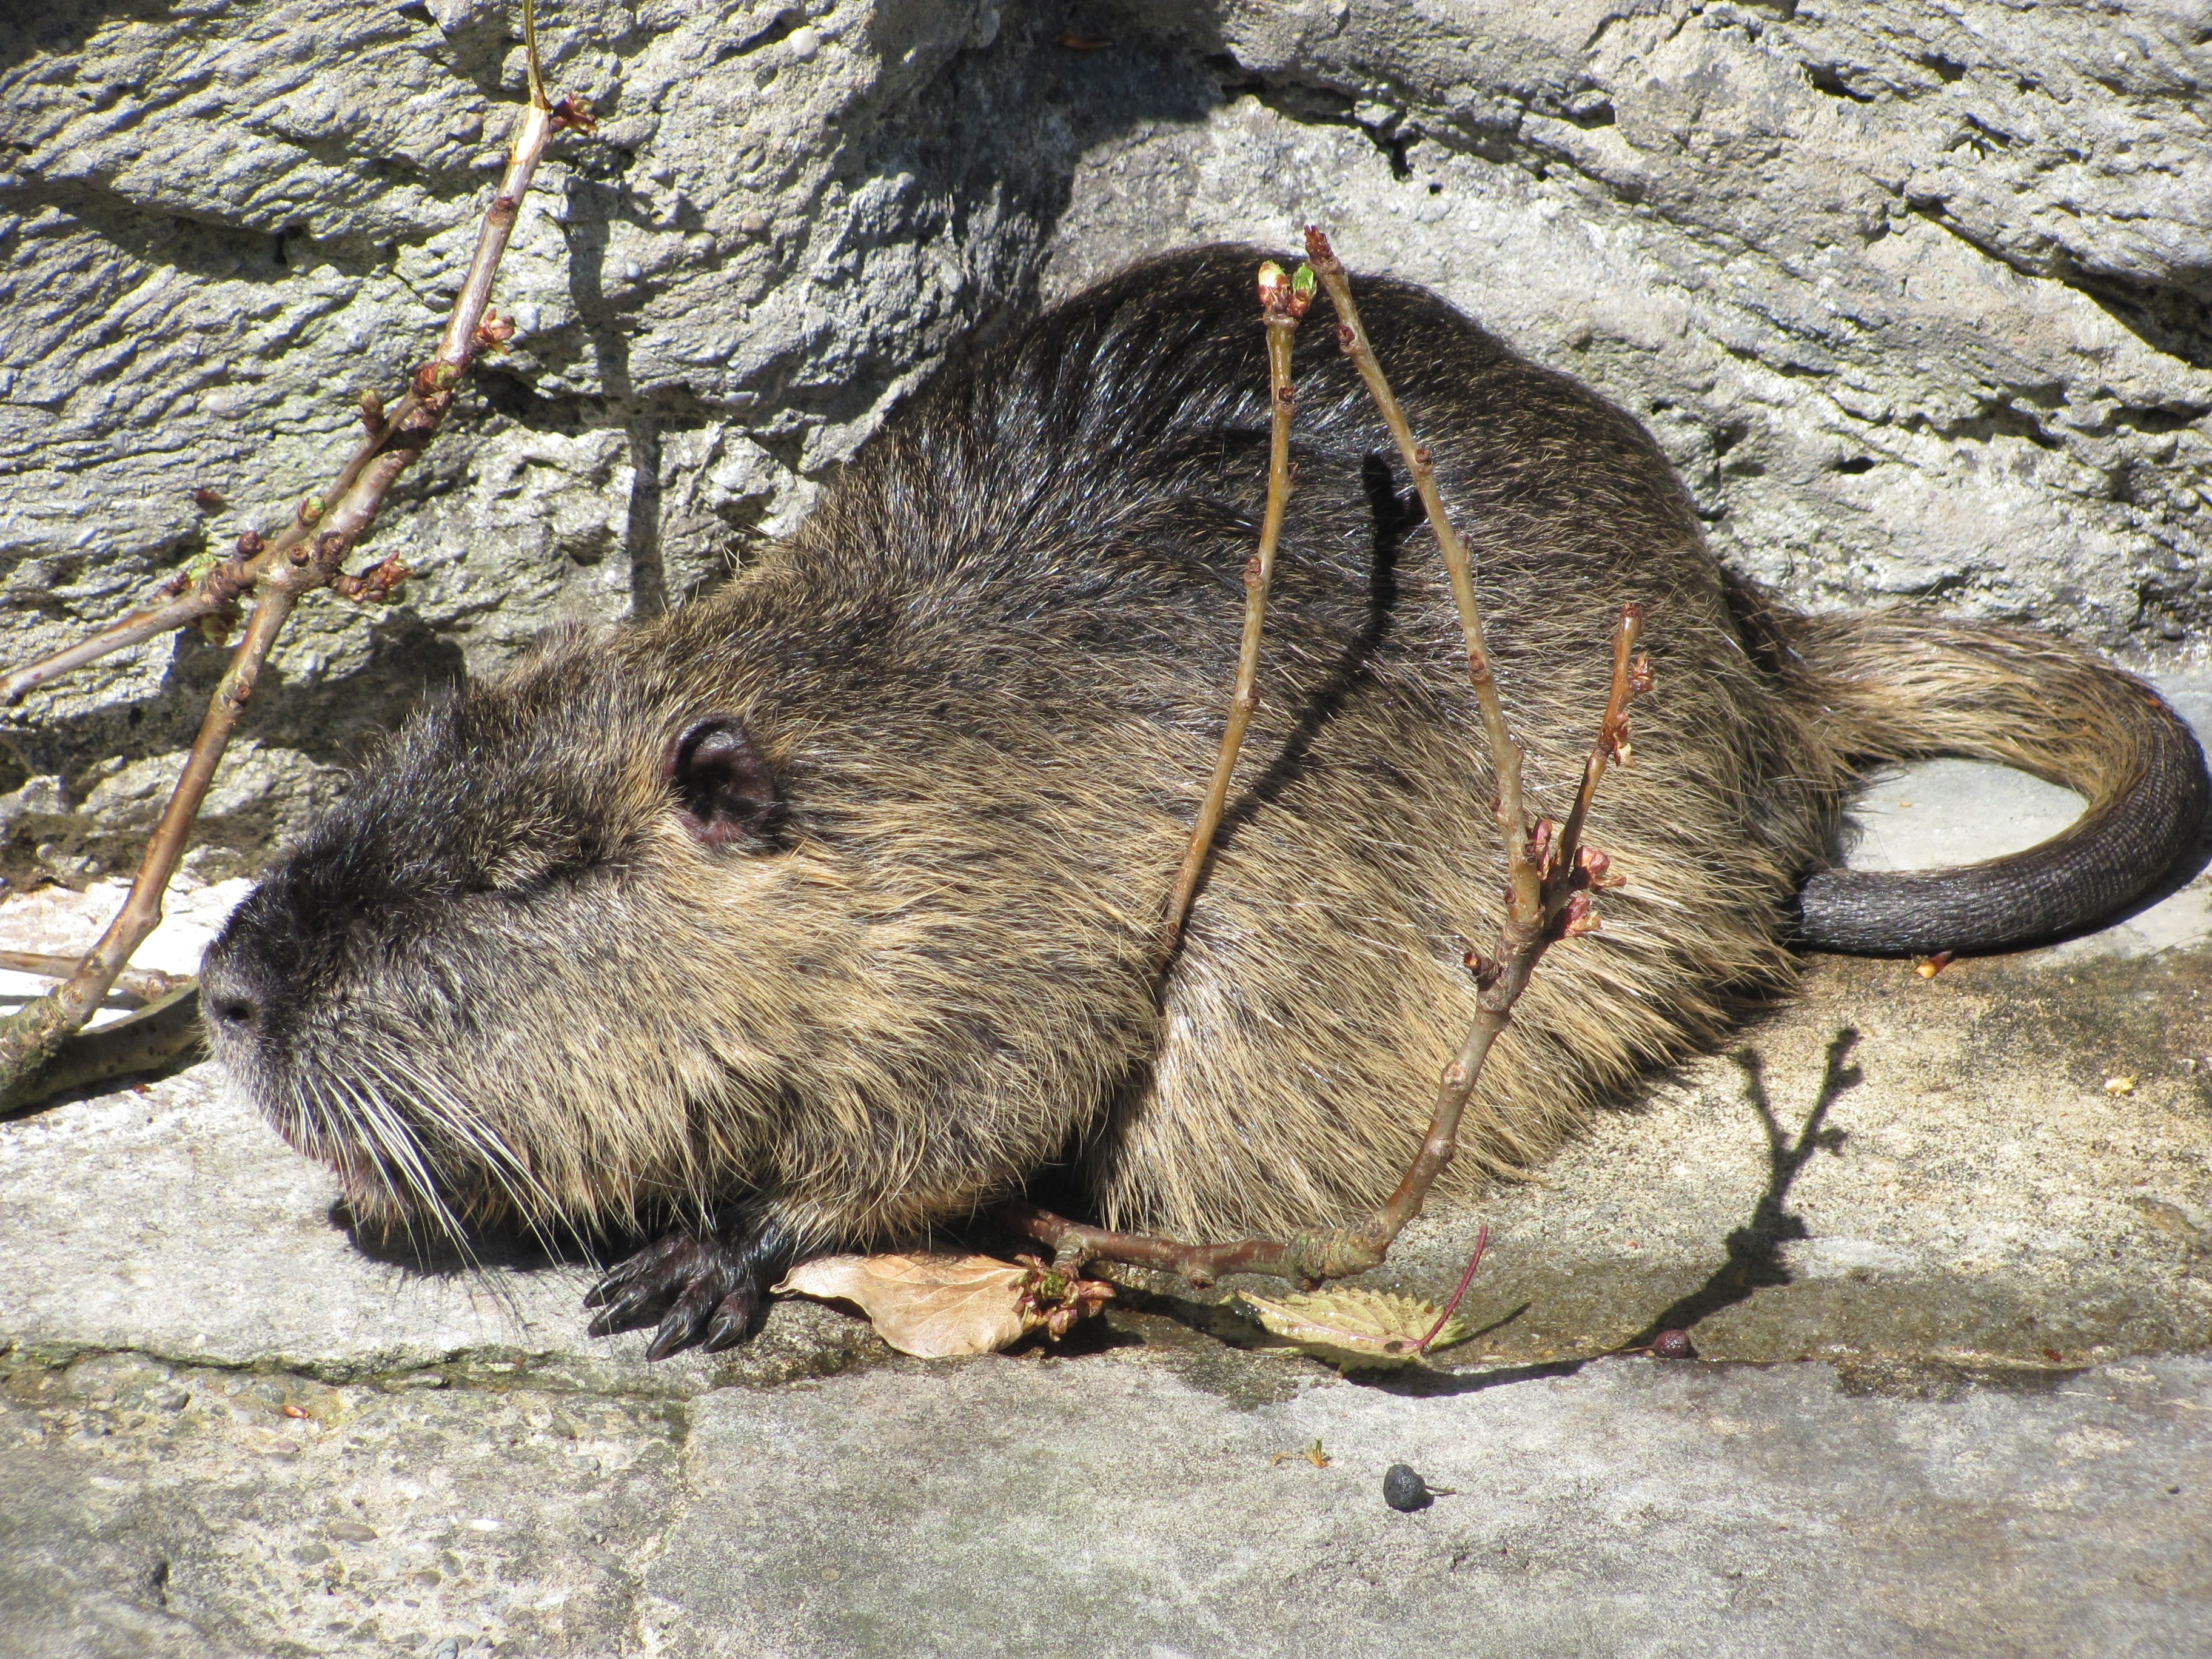 black and brown rodent